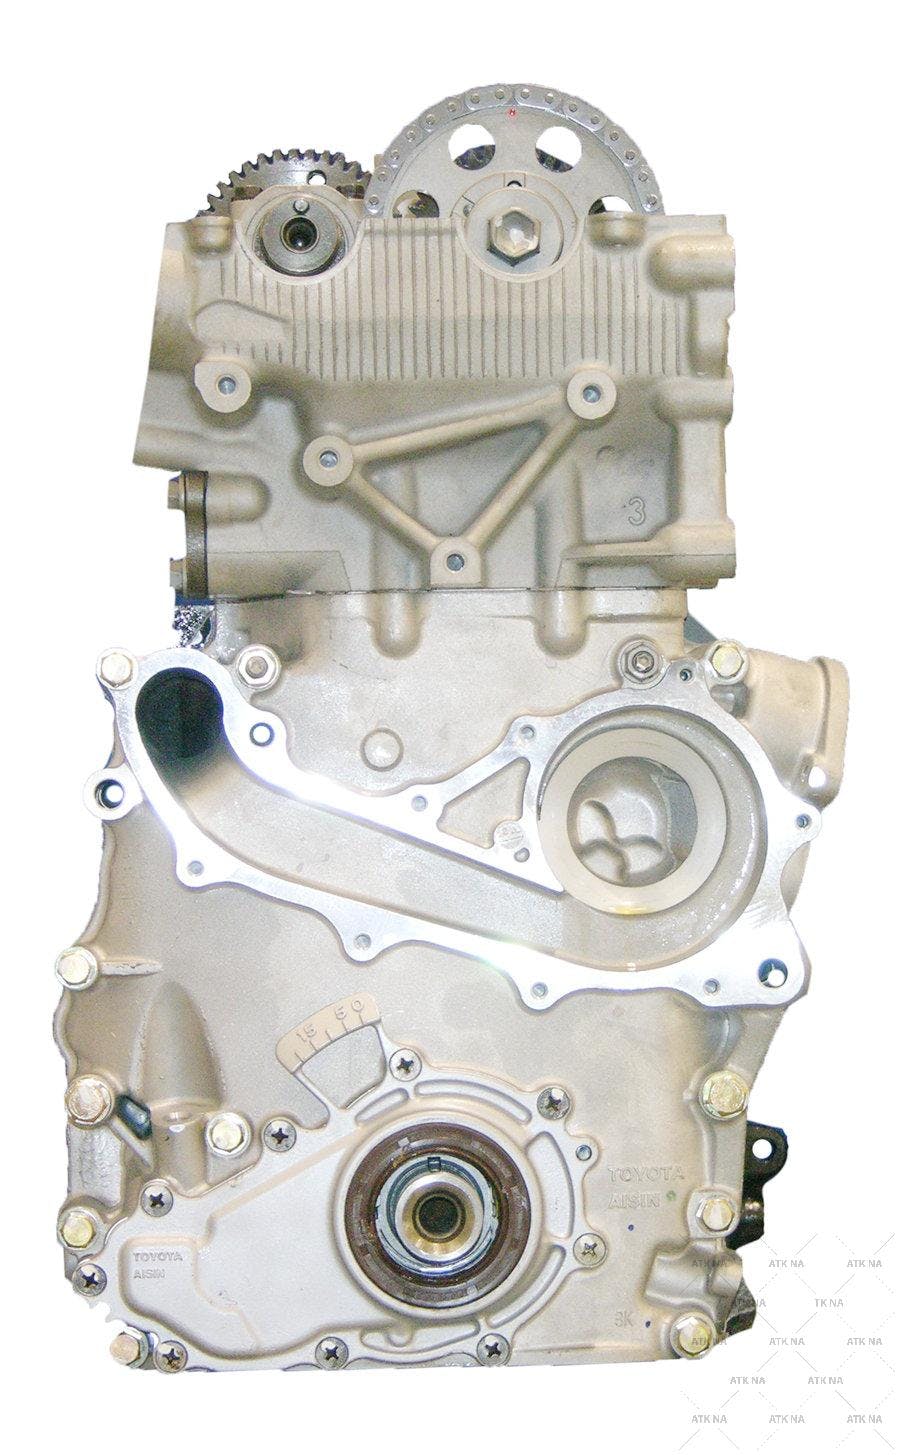 2.7L Inline-4 Engine for 1996-1997 Toyota 4Runner/T100/Tacoma